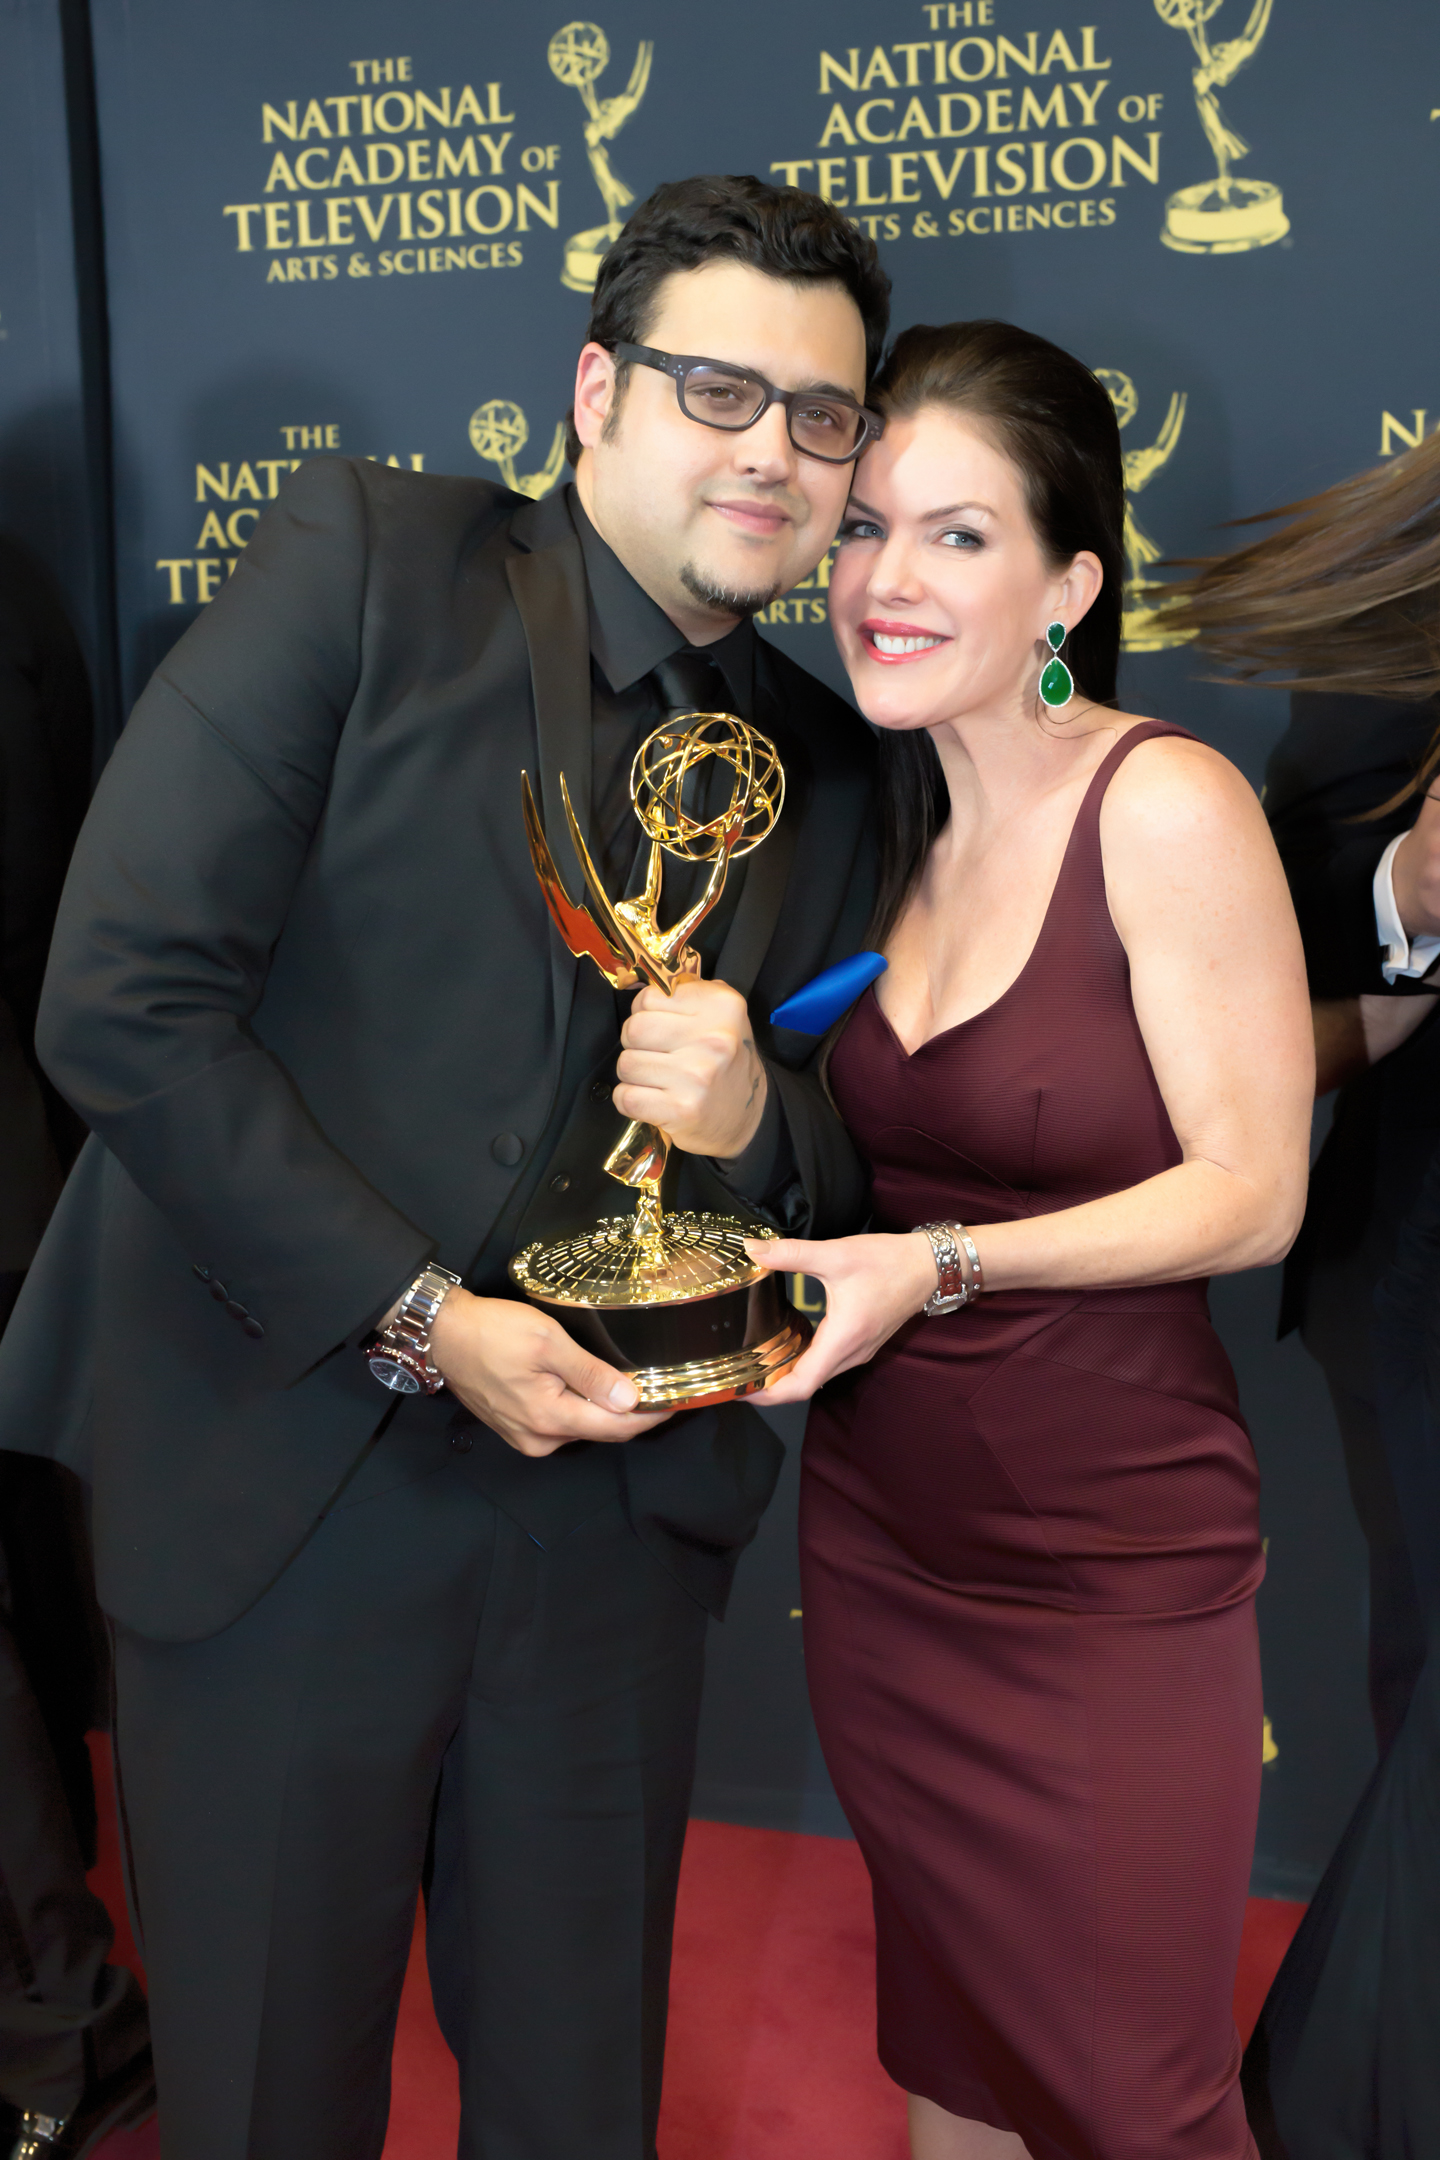 The Bay The Series Wins Daytime Emmy Award for Best Drama Series - New Approaches with Gregori J. Martin and Kira Reed Lorsch